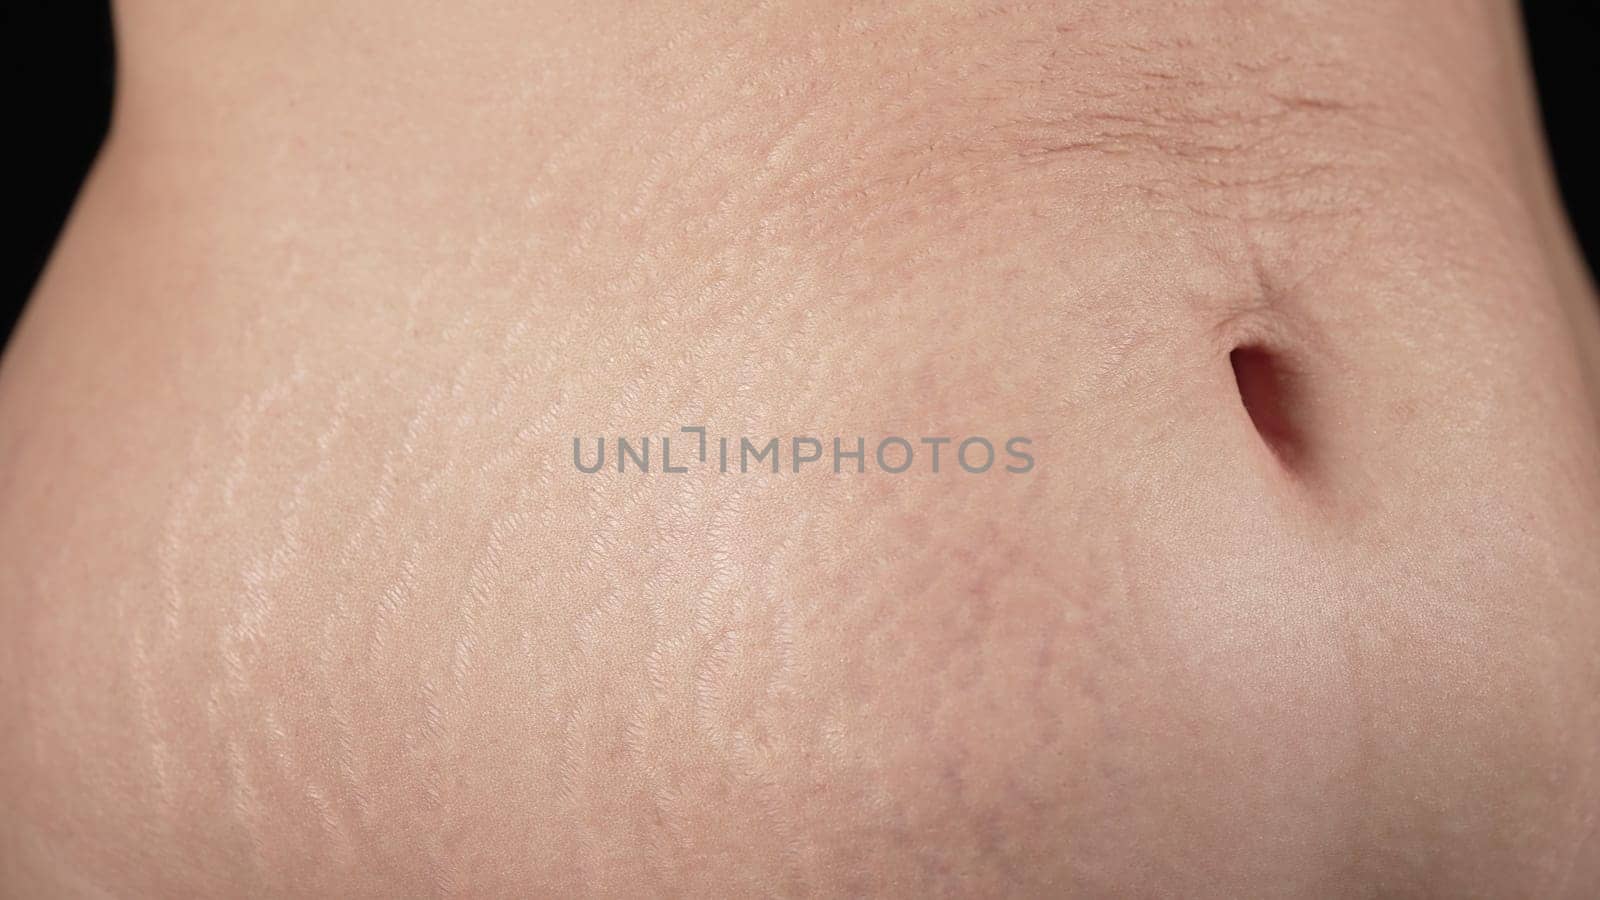 Woman showing stretch marks on abdomen after pregnancy. Natural body texture. Mothers belly with heavy wrinkles,loose skin after birth child.Health care,rehabilitation,body positive,accepting